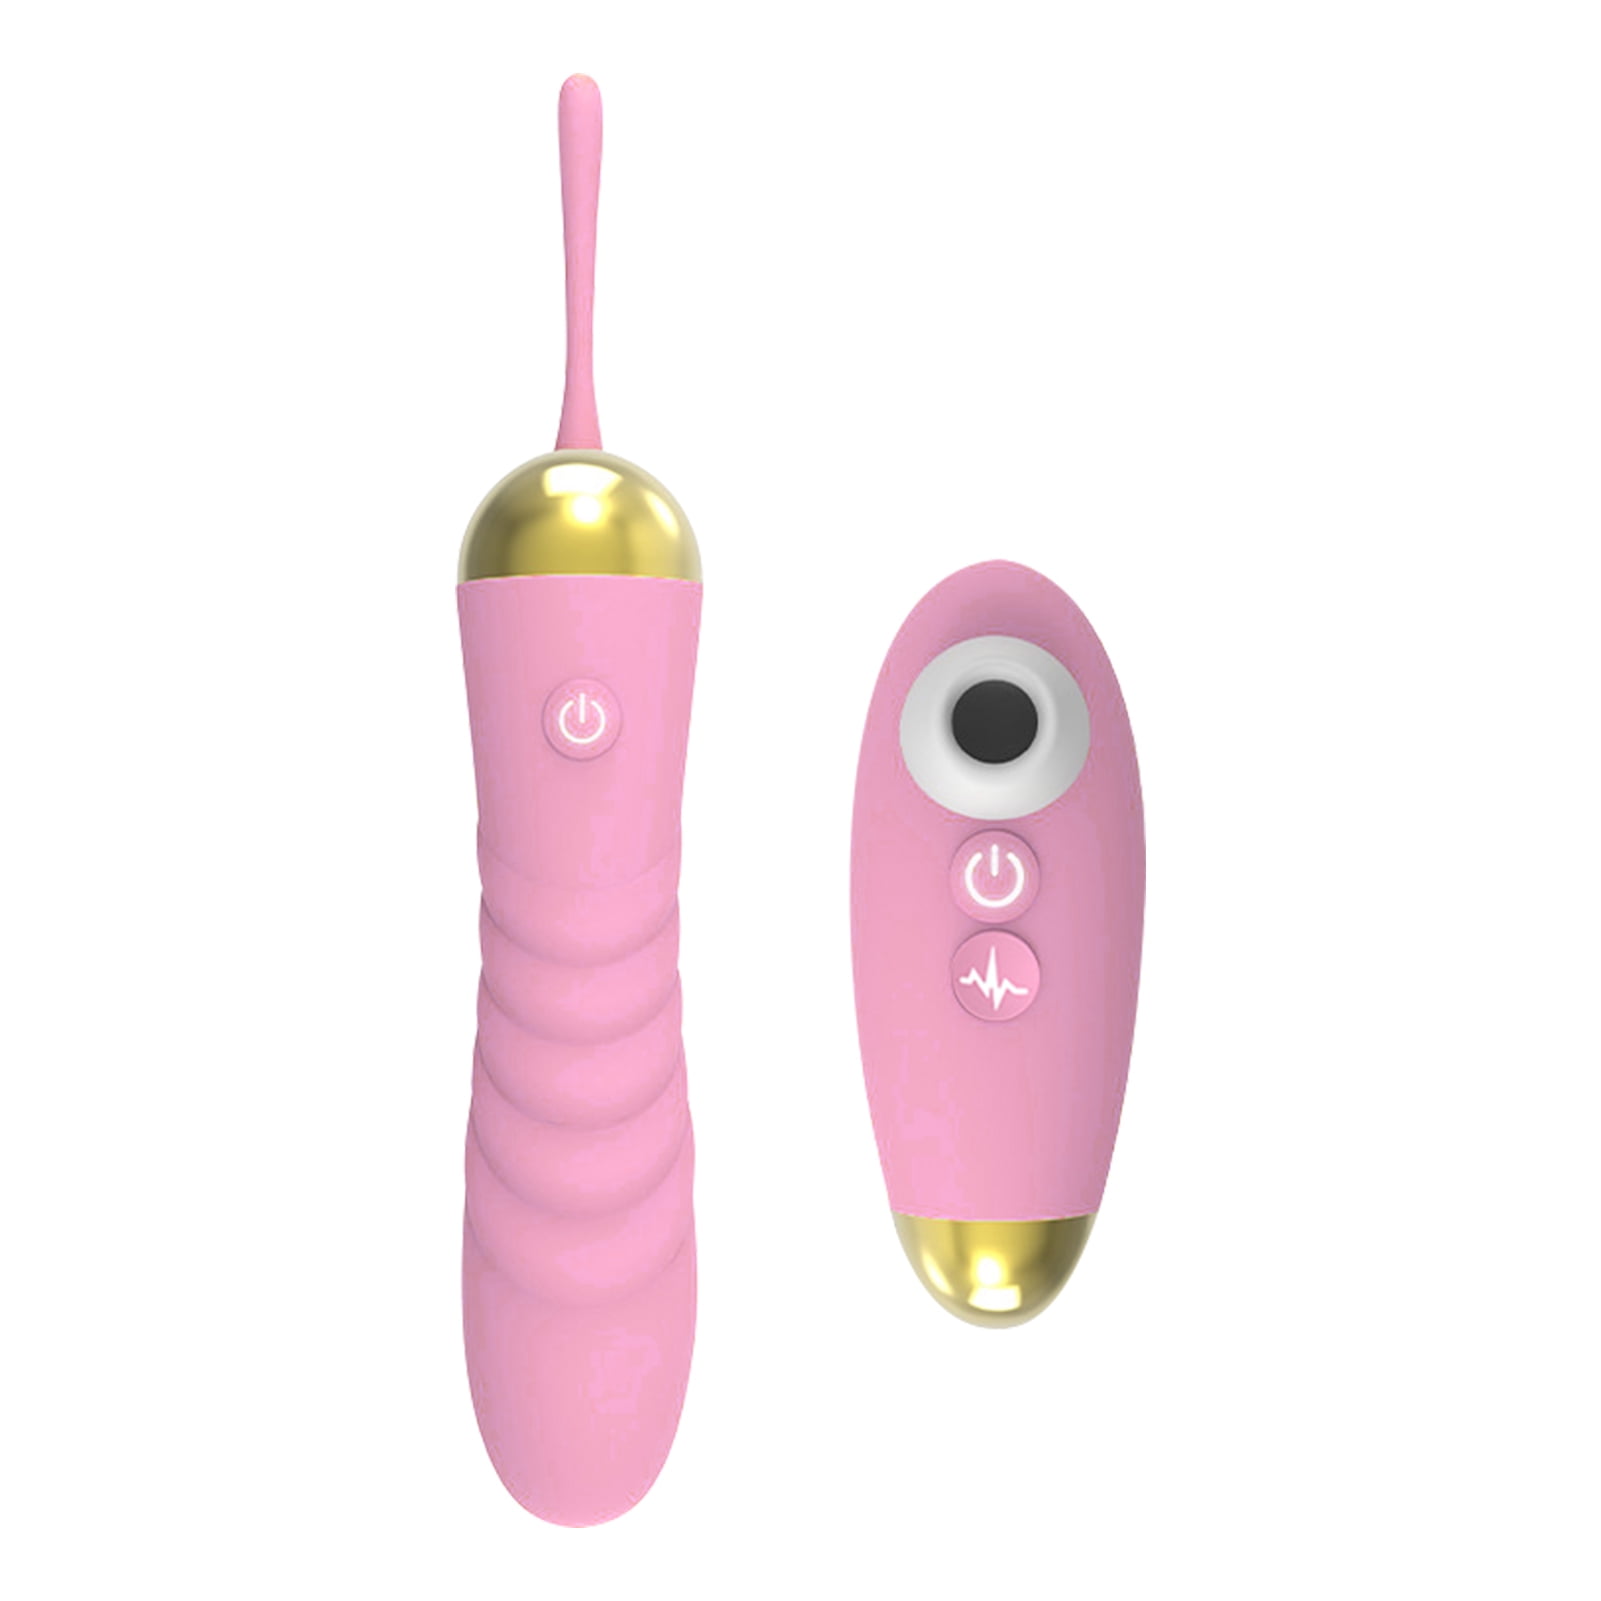 Cechg Home 10 Modes Clitoral Licking G Spot Vibrator For Women With Remote Control photo